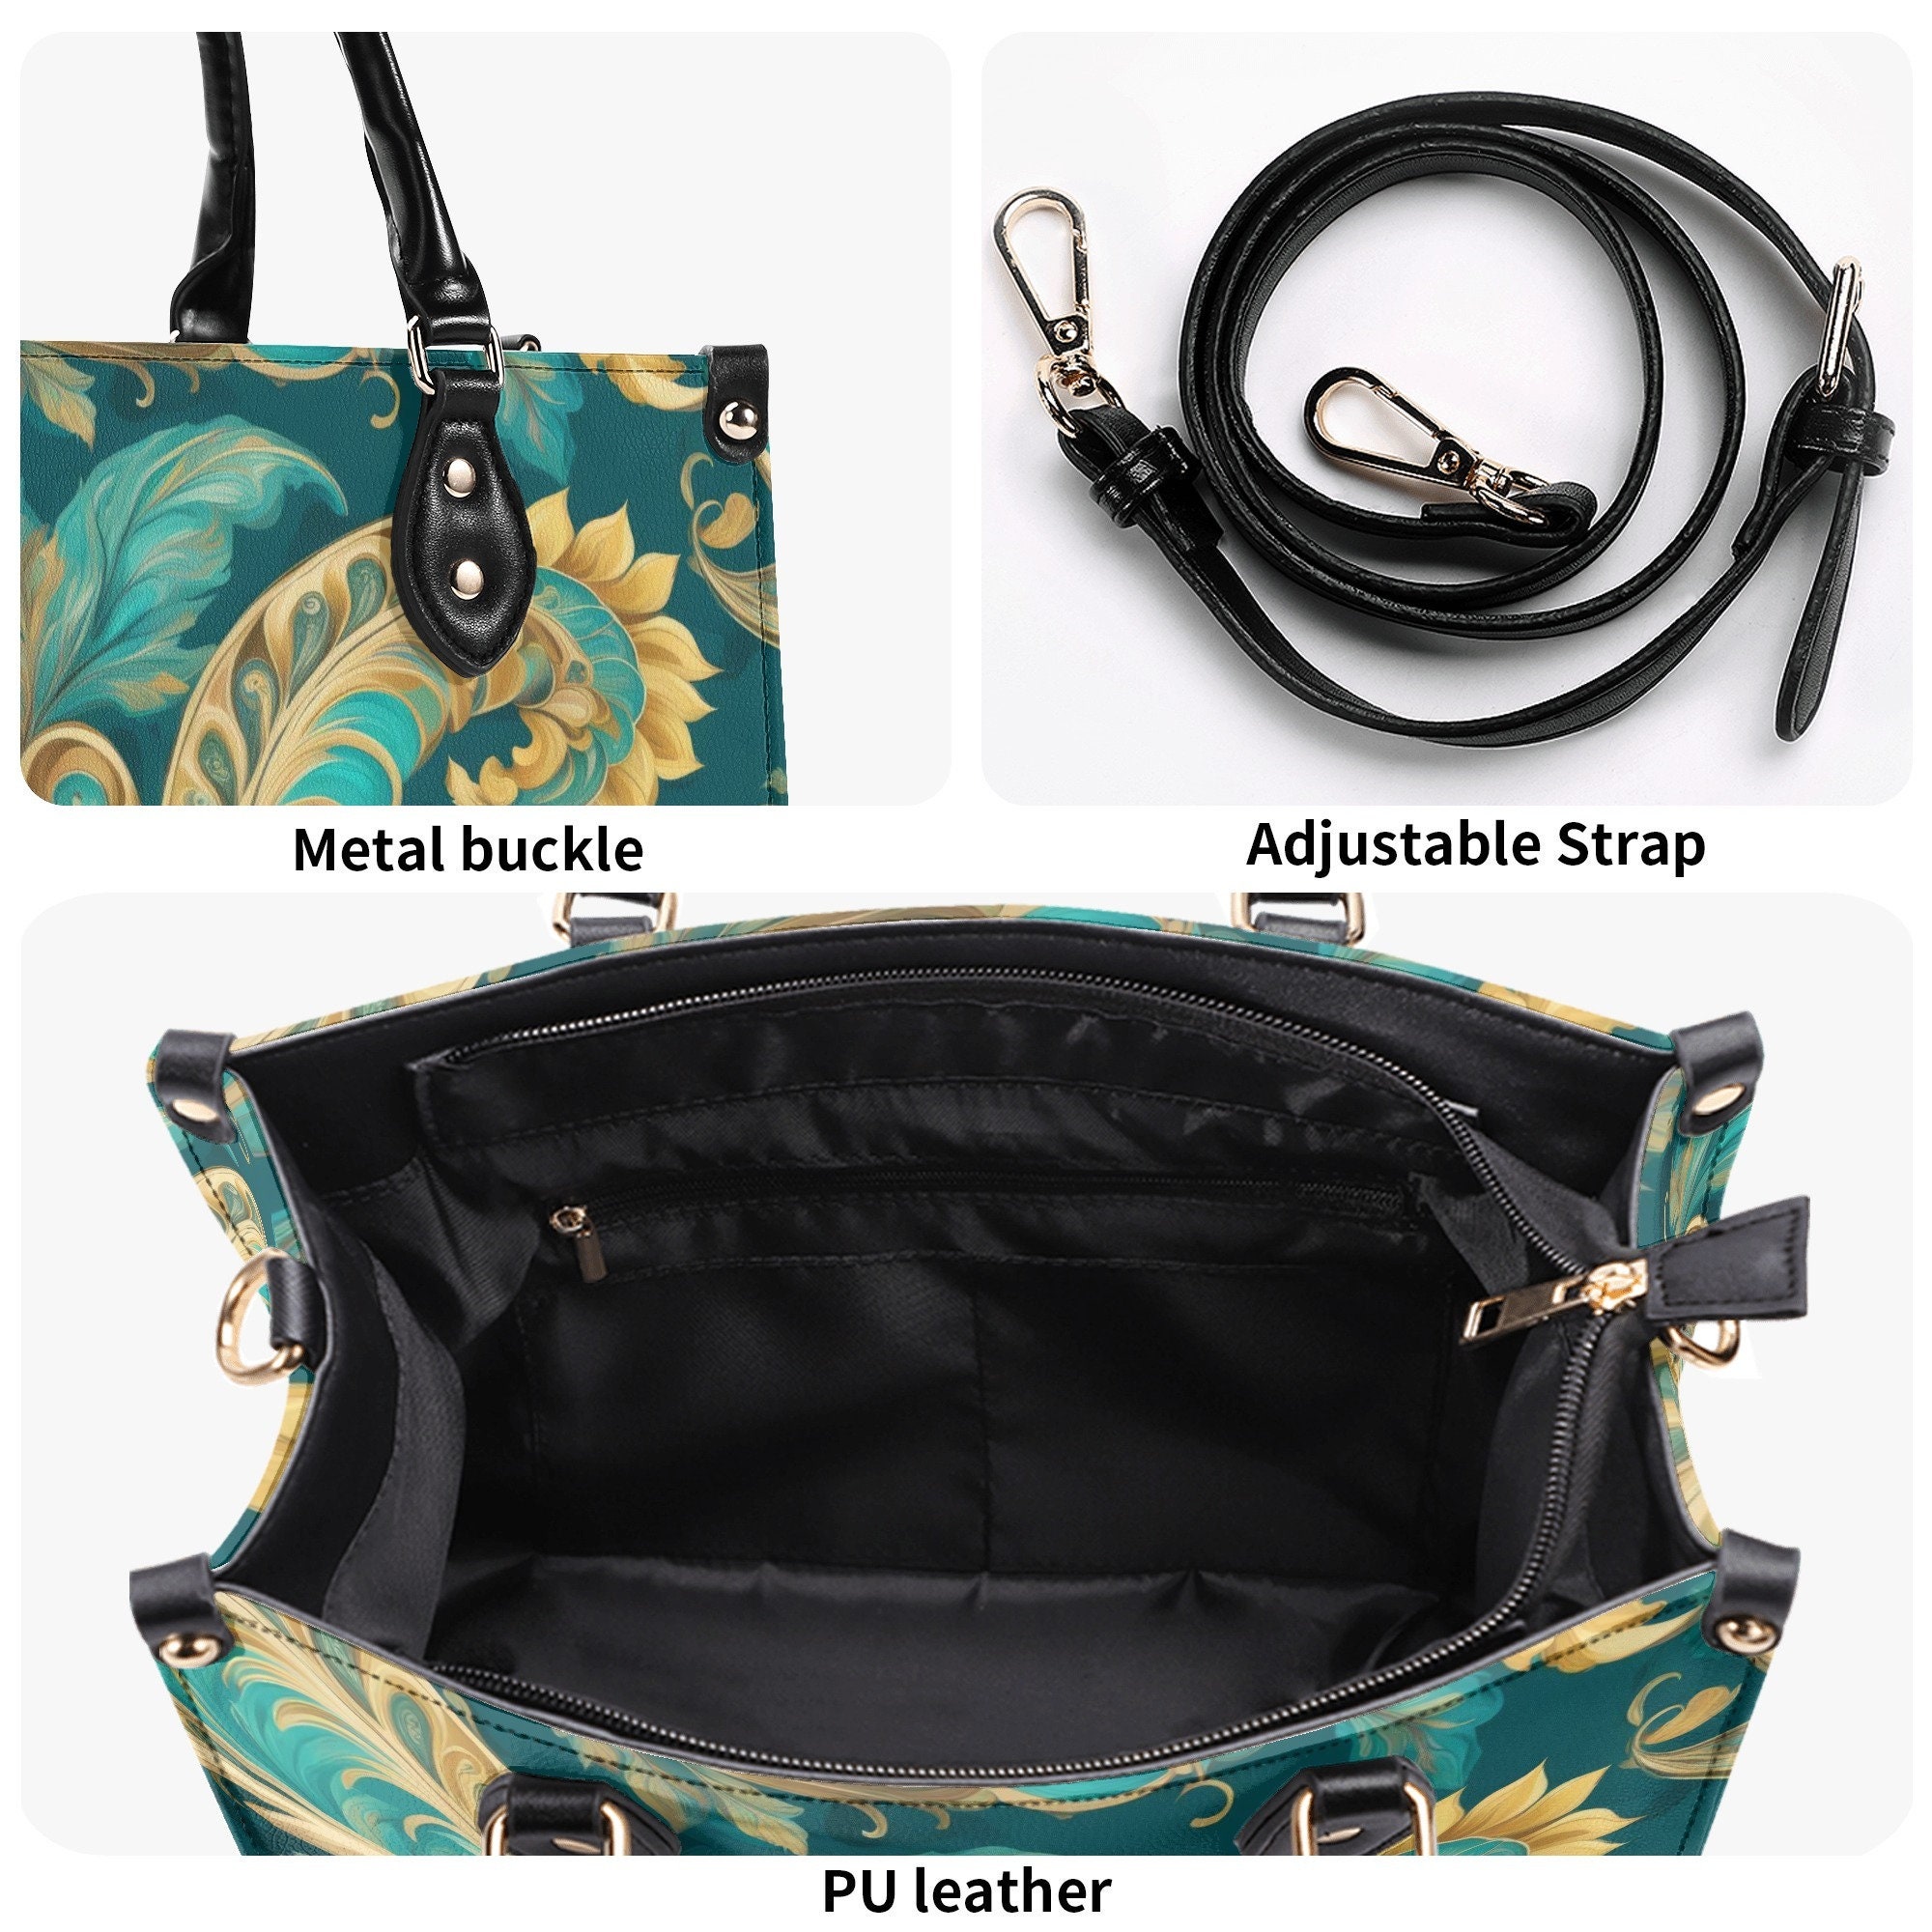 Turquoise Tapestry Paisley Tote Purse, Blue Green Unique Abstract Handbag Vegan Leather